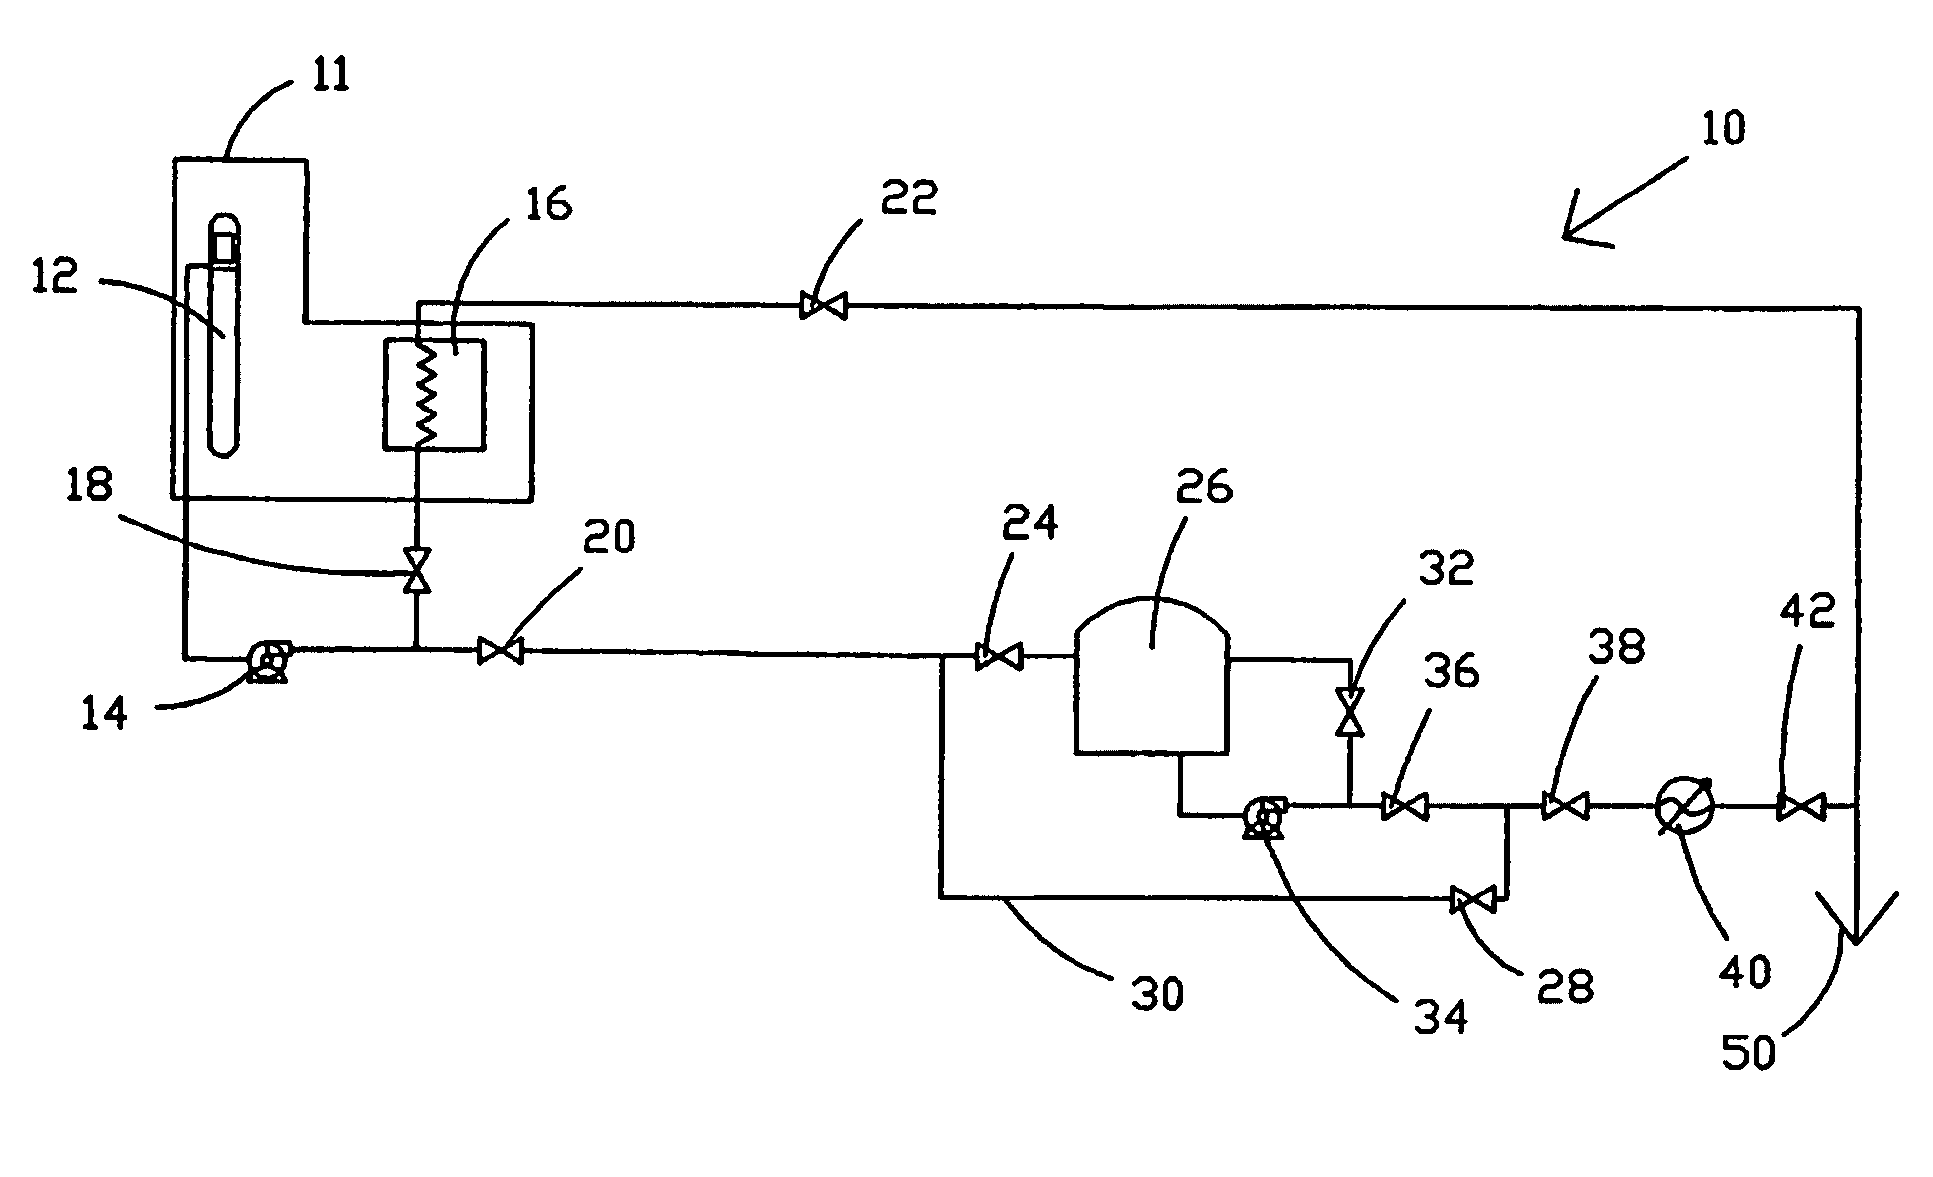 Backup system and method for production of pressurized gas